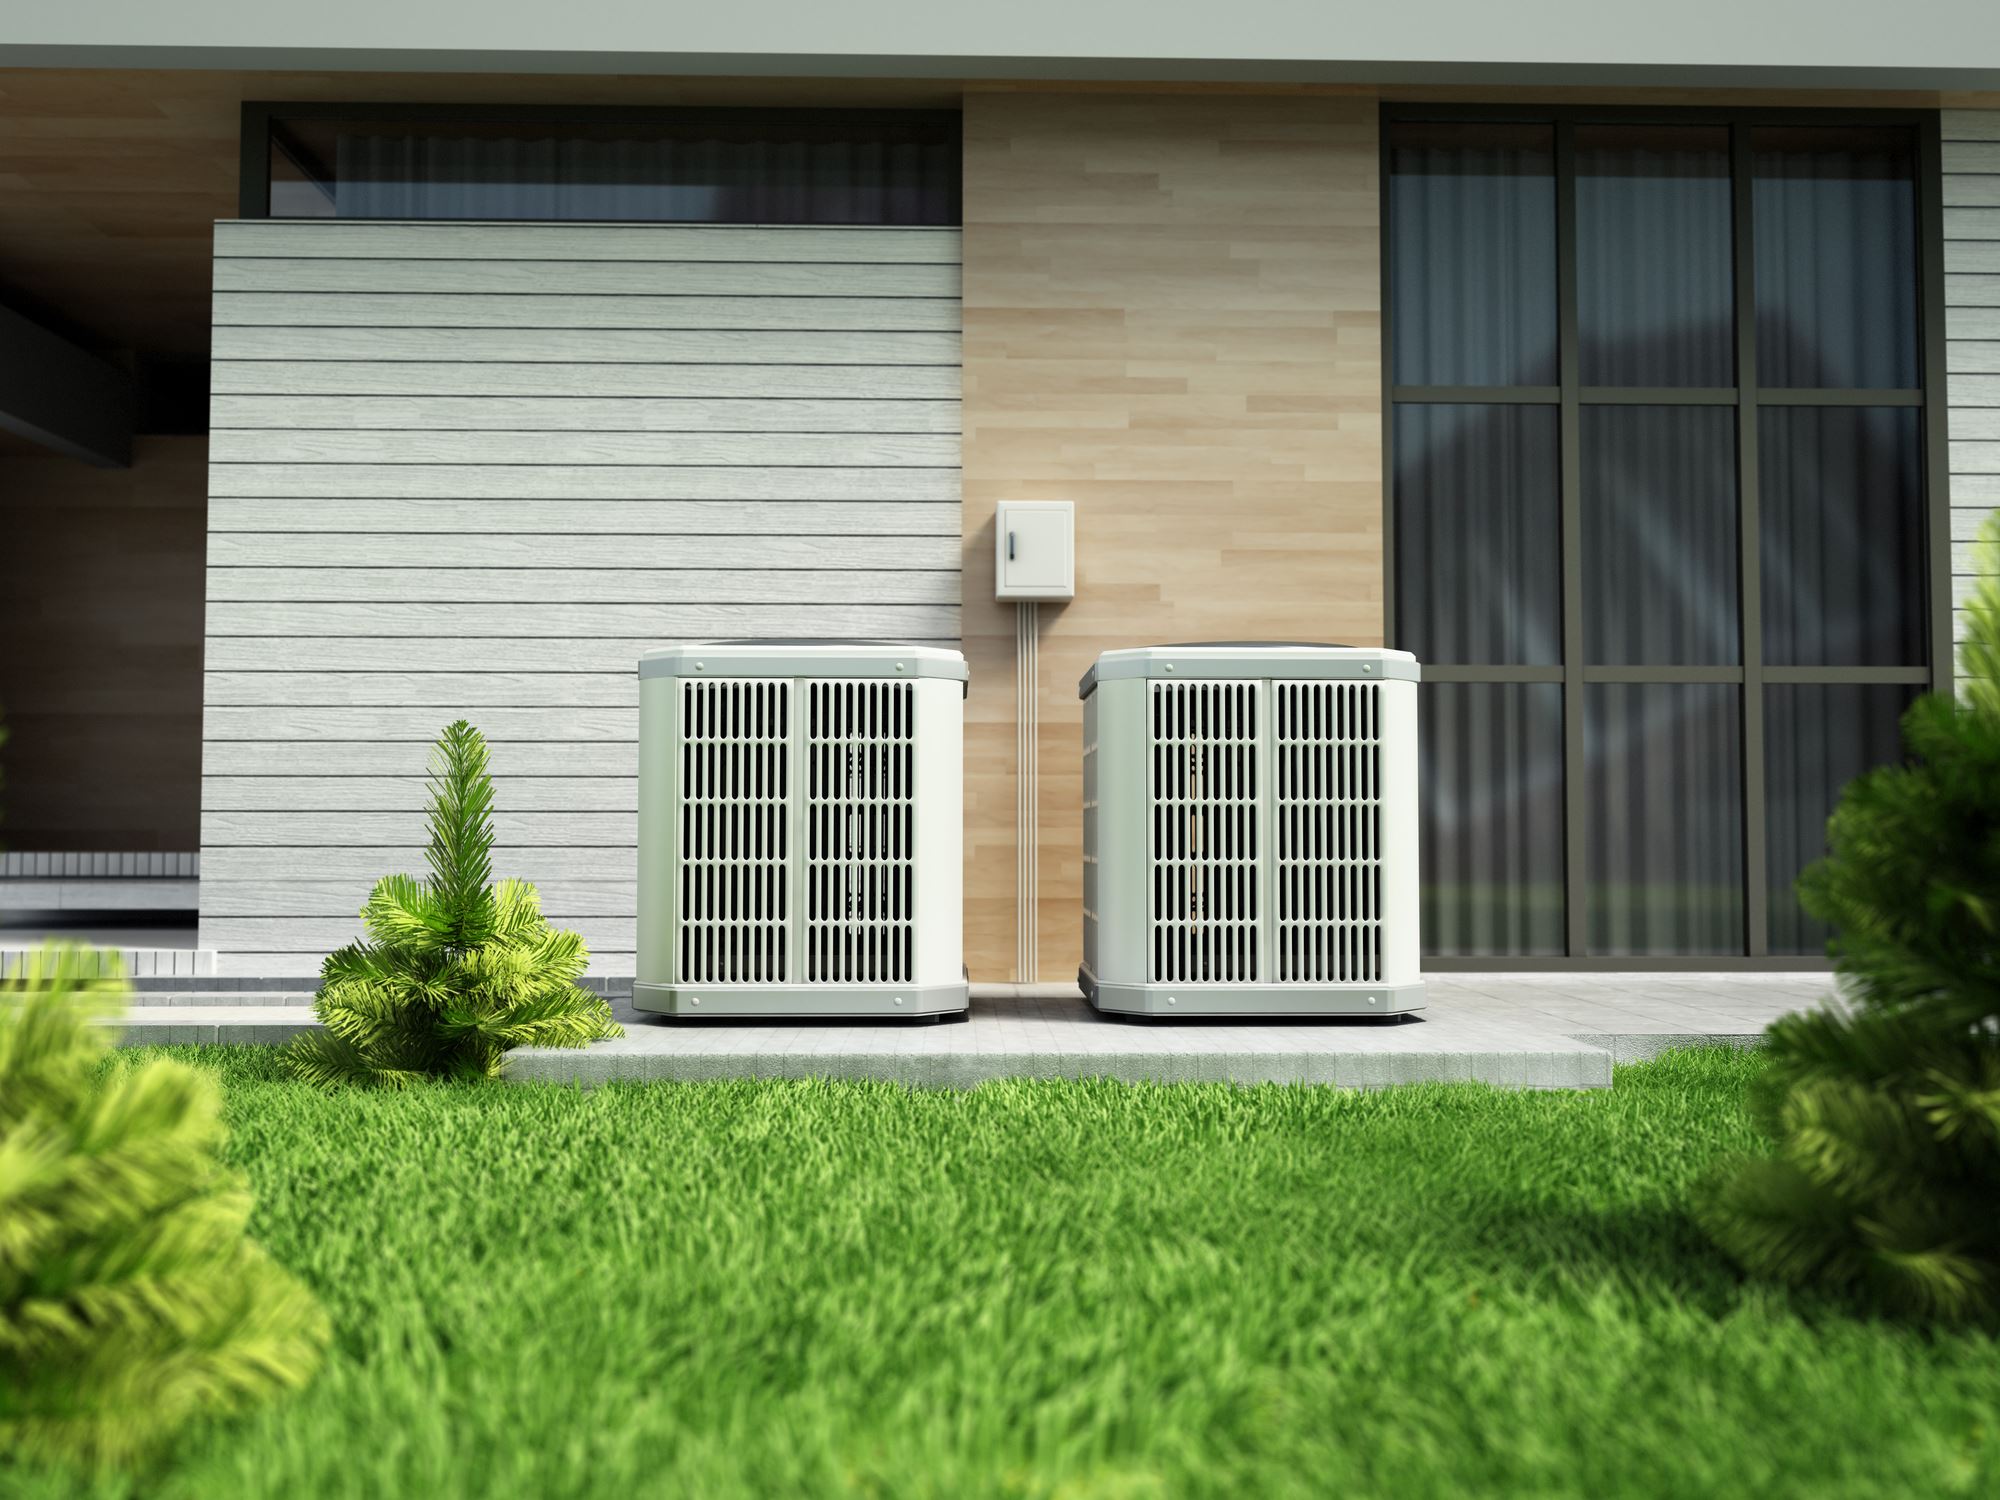 What You Need To Know About The Federal Tax Credit For Heat Pumps In 2023